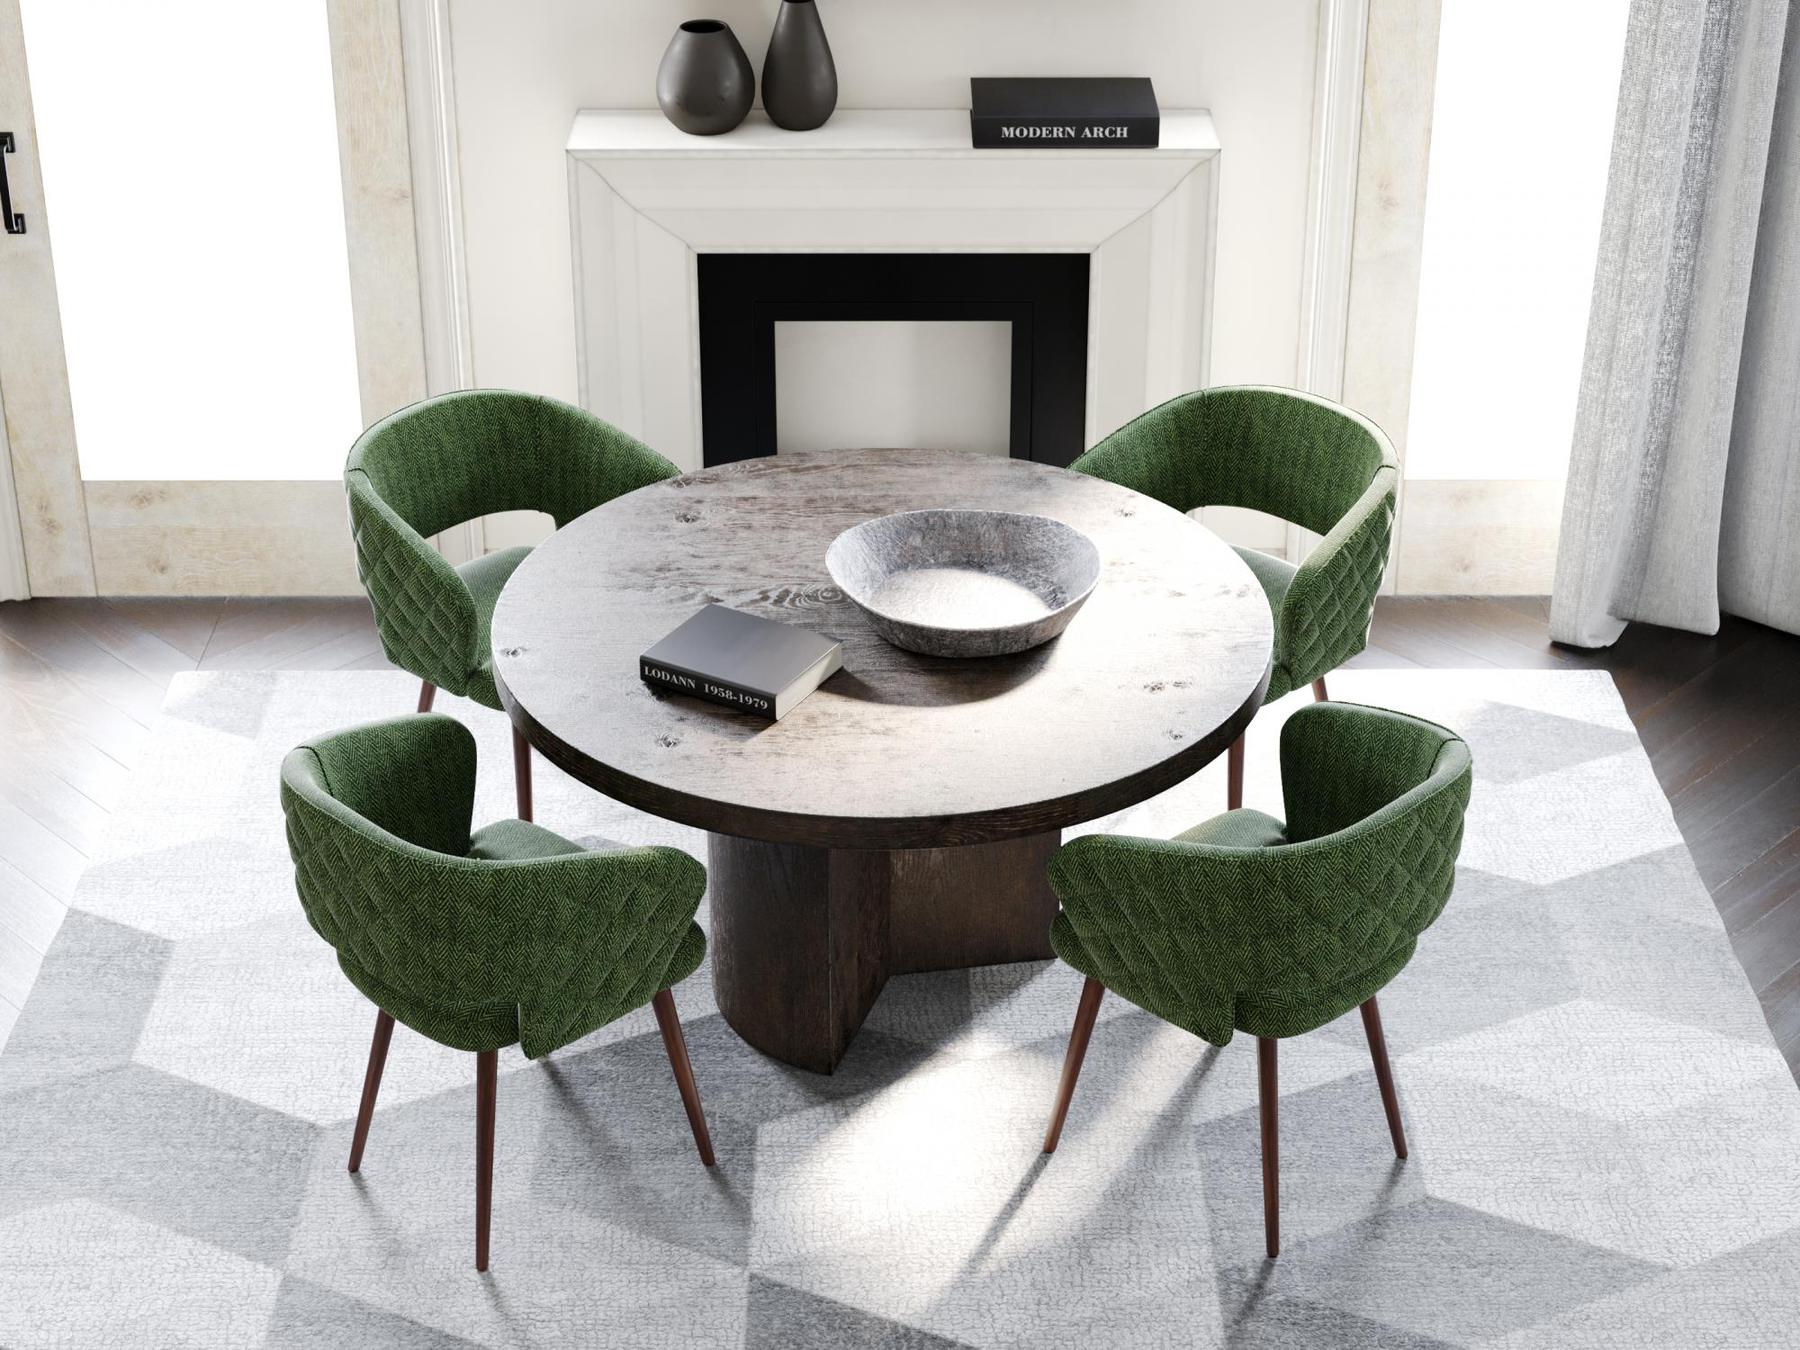 Napoli Barrel Back , Mid-Century Modern design, upholstered dining chair in Green with Brown Wood legs in a dining room with set of four chairs around a round table.